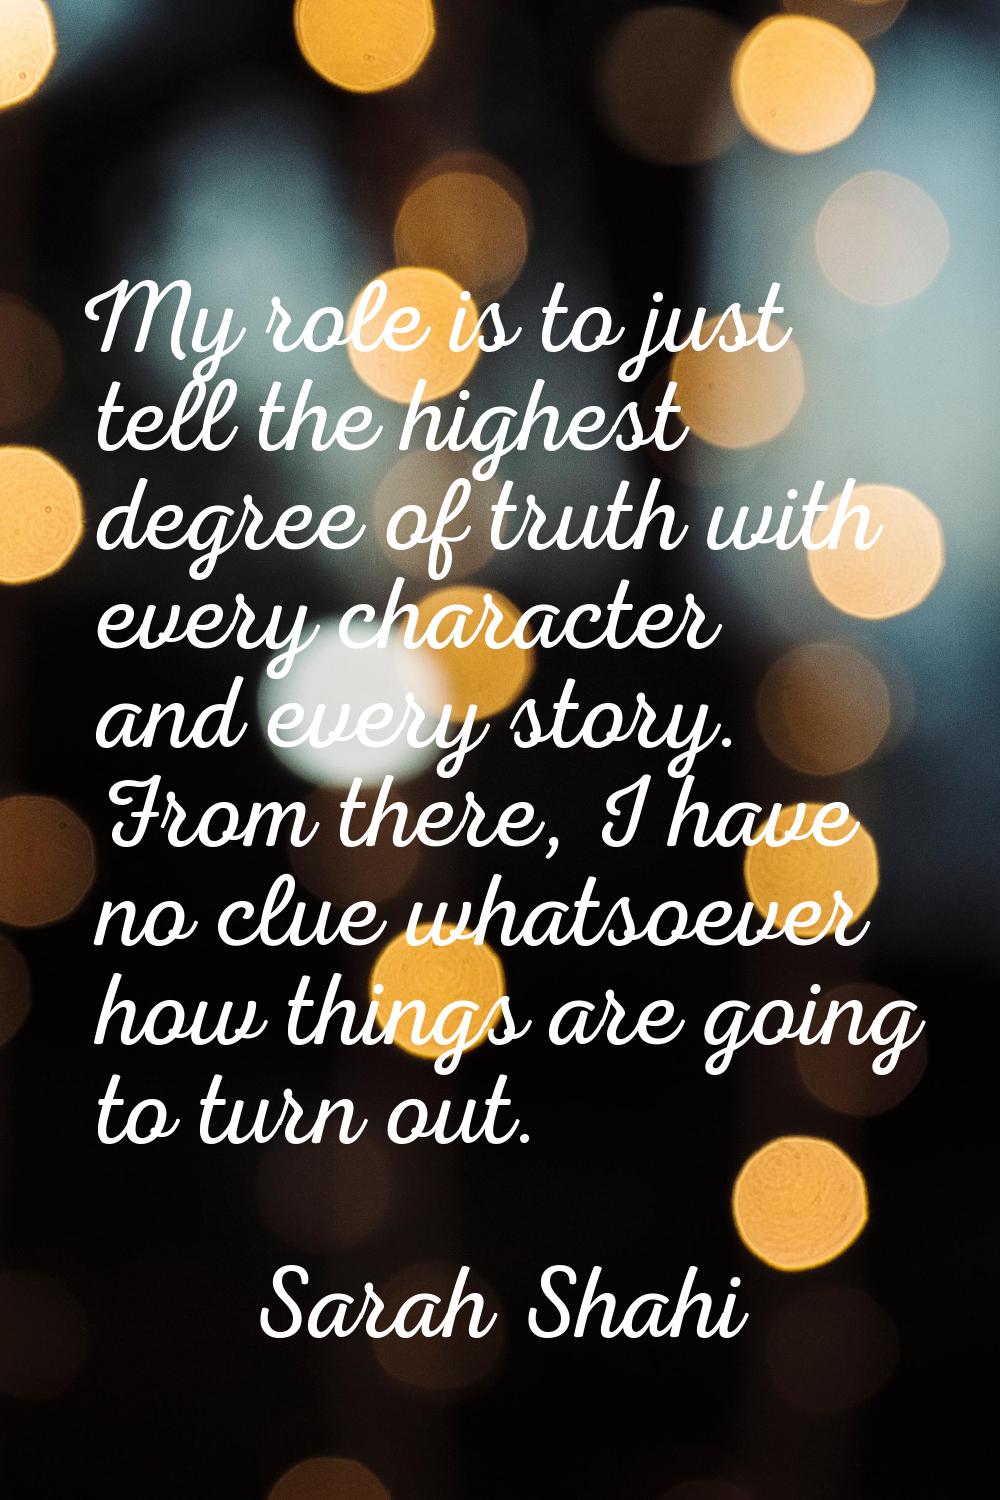 My role is to just tell the highest degree of truth with every character and every story. From ther